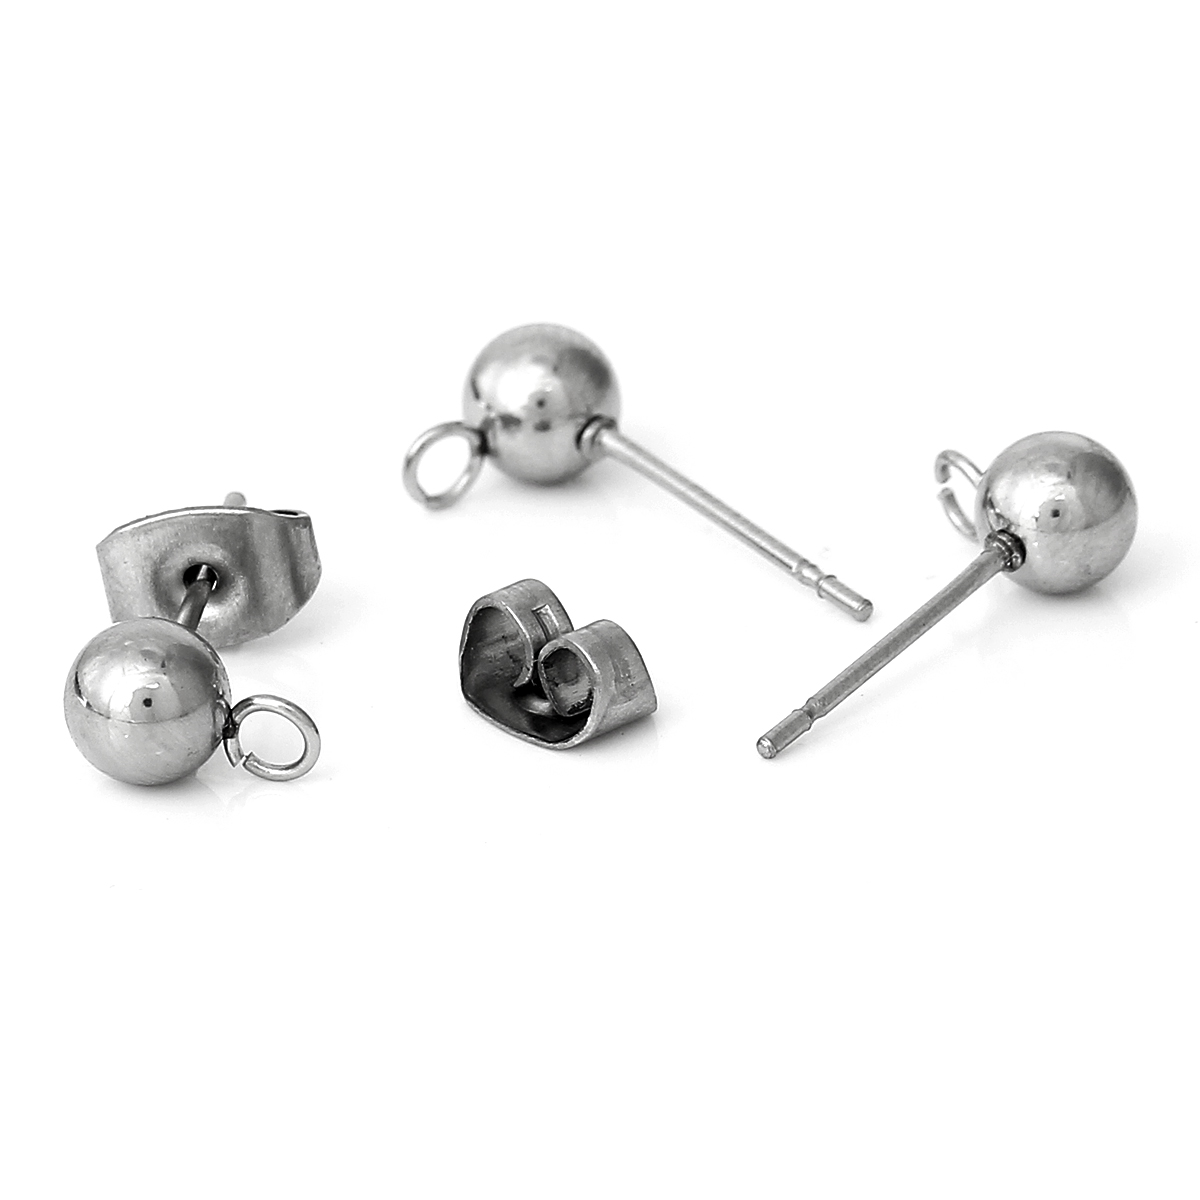 Picture of 304 Stainless Steel Ear Post Stud Earrings Findings Ball Silver Tone W/ Loop 17mm( 5/8") x 8mm( 3/8"), Post/ Wire Size: (21 gauge), 20 PCs